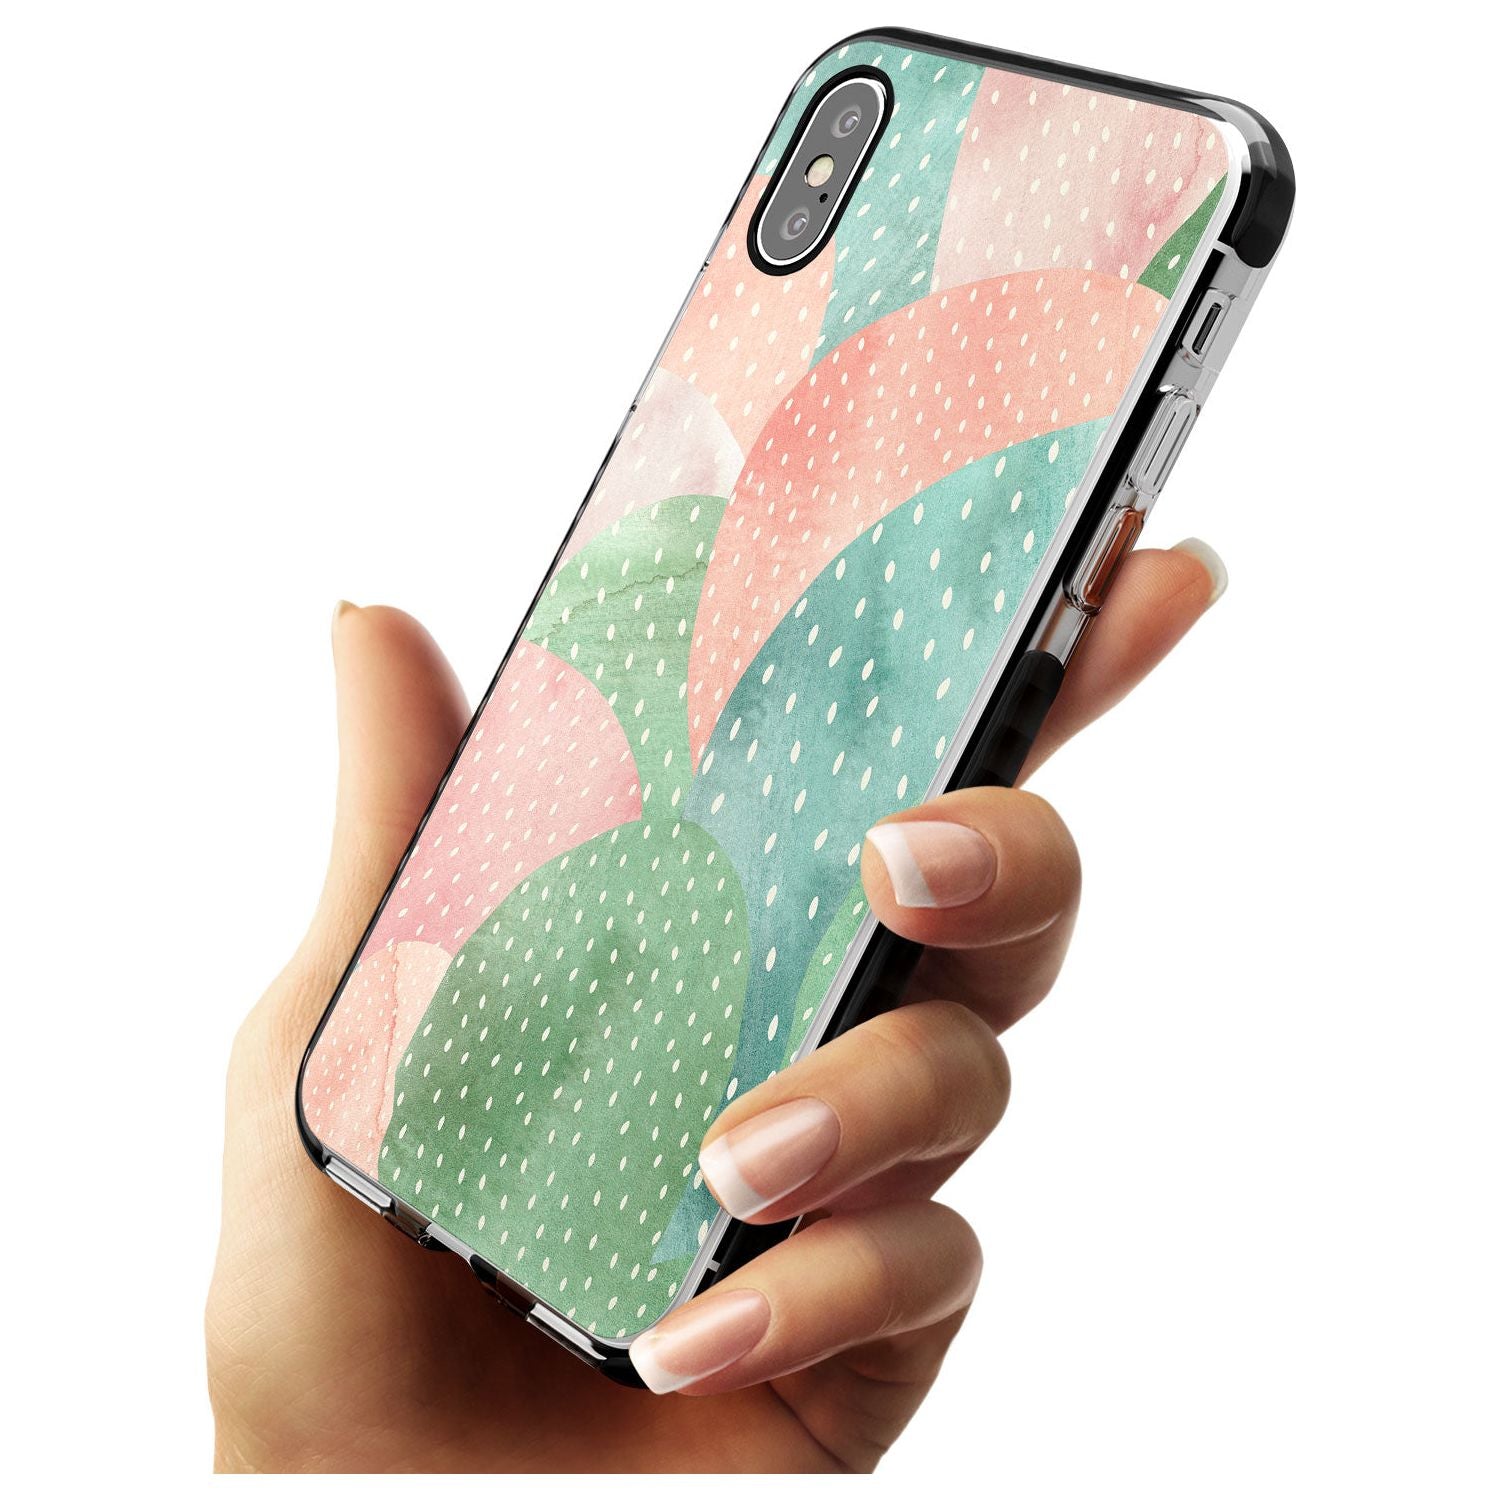 Colourful Close-Up Cacti Design Black Impact Phone Case for iPhone X XS Max XR